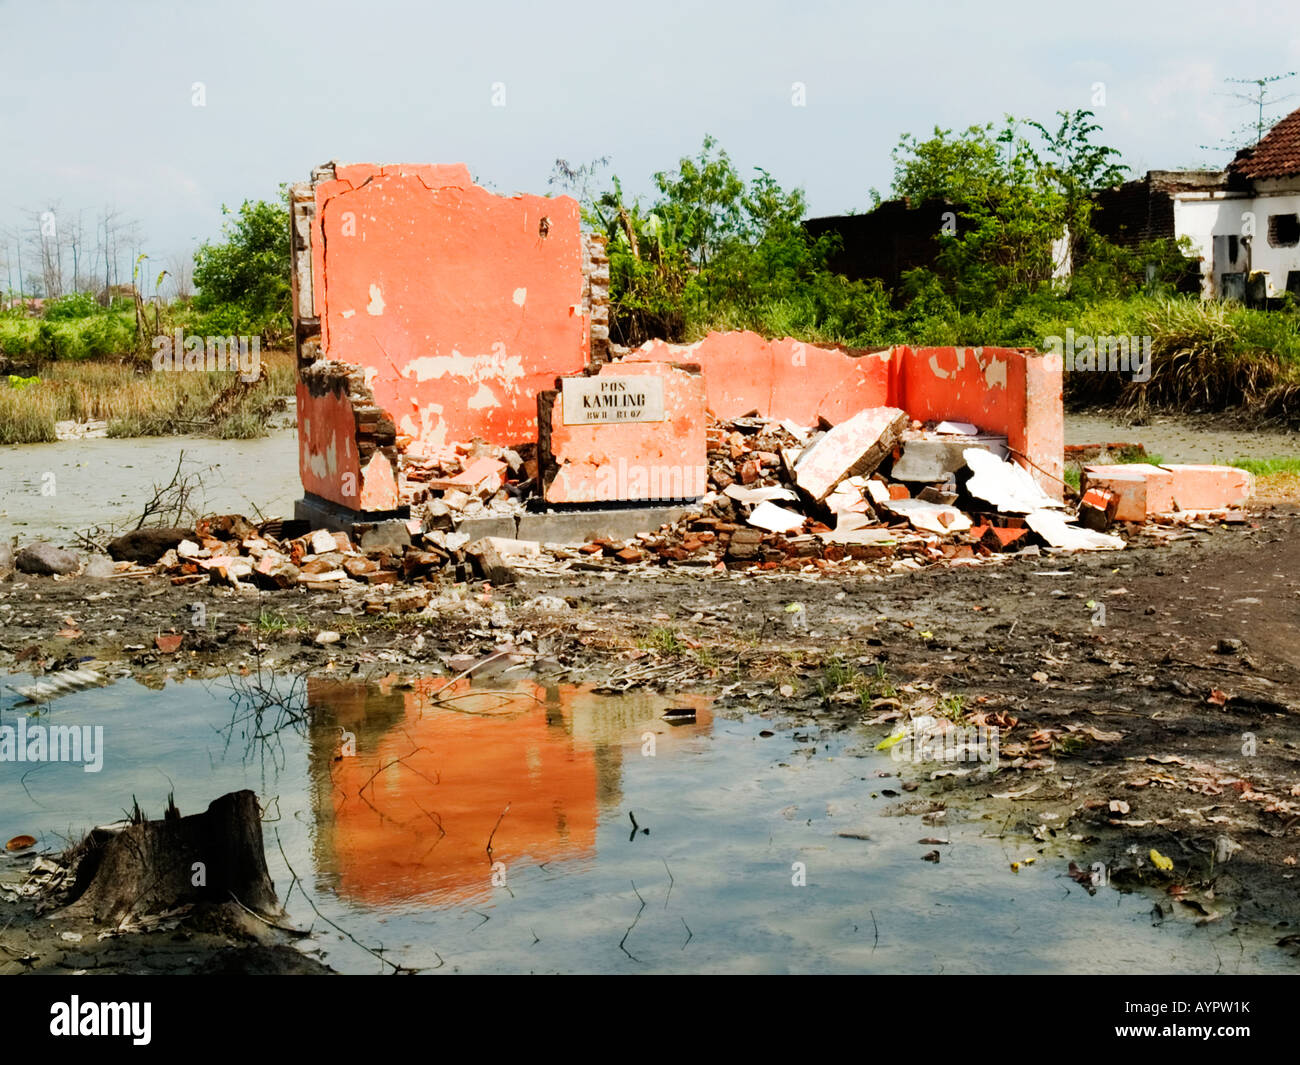 Derelict abandoned security post at the edge of the hot mud disaster,Sidoarjo,East Java,Indonesia. Stock Photo